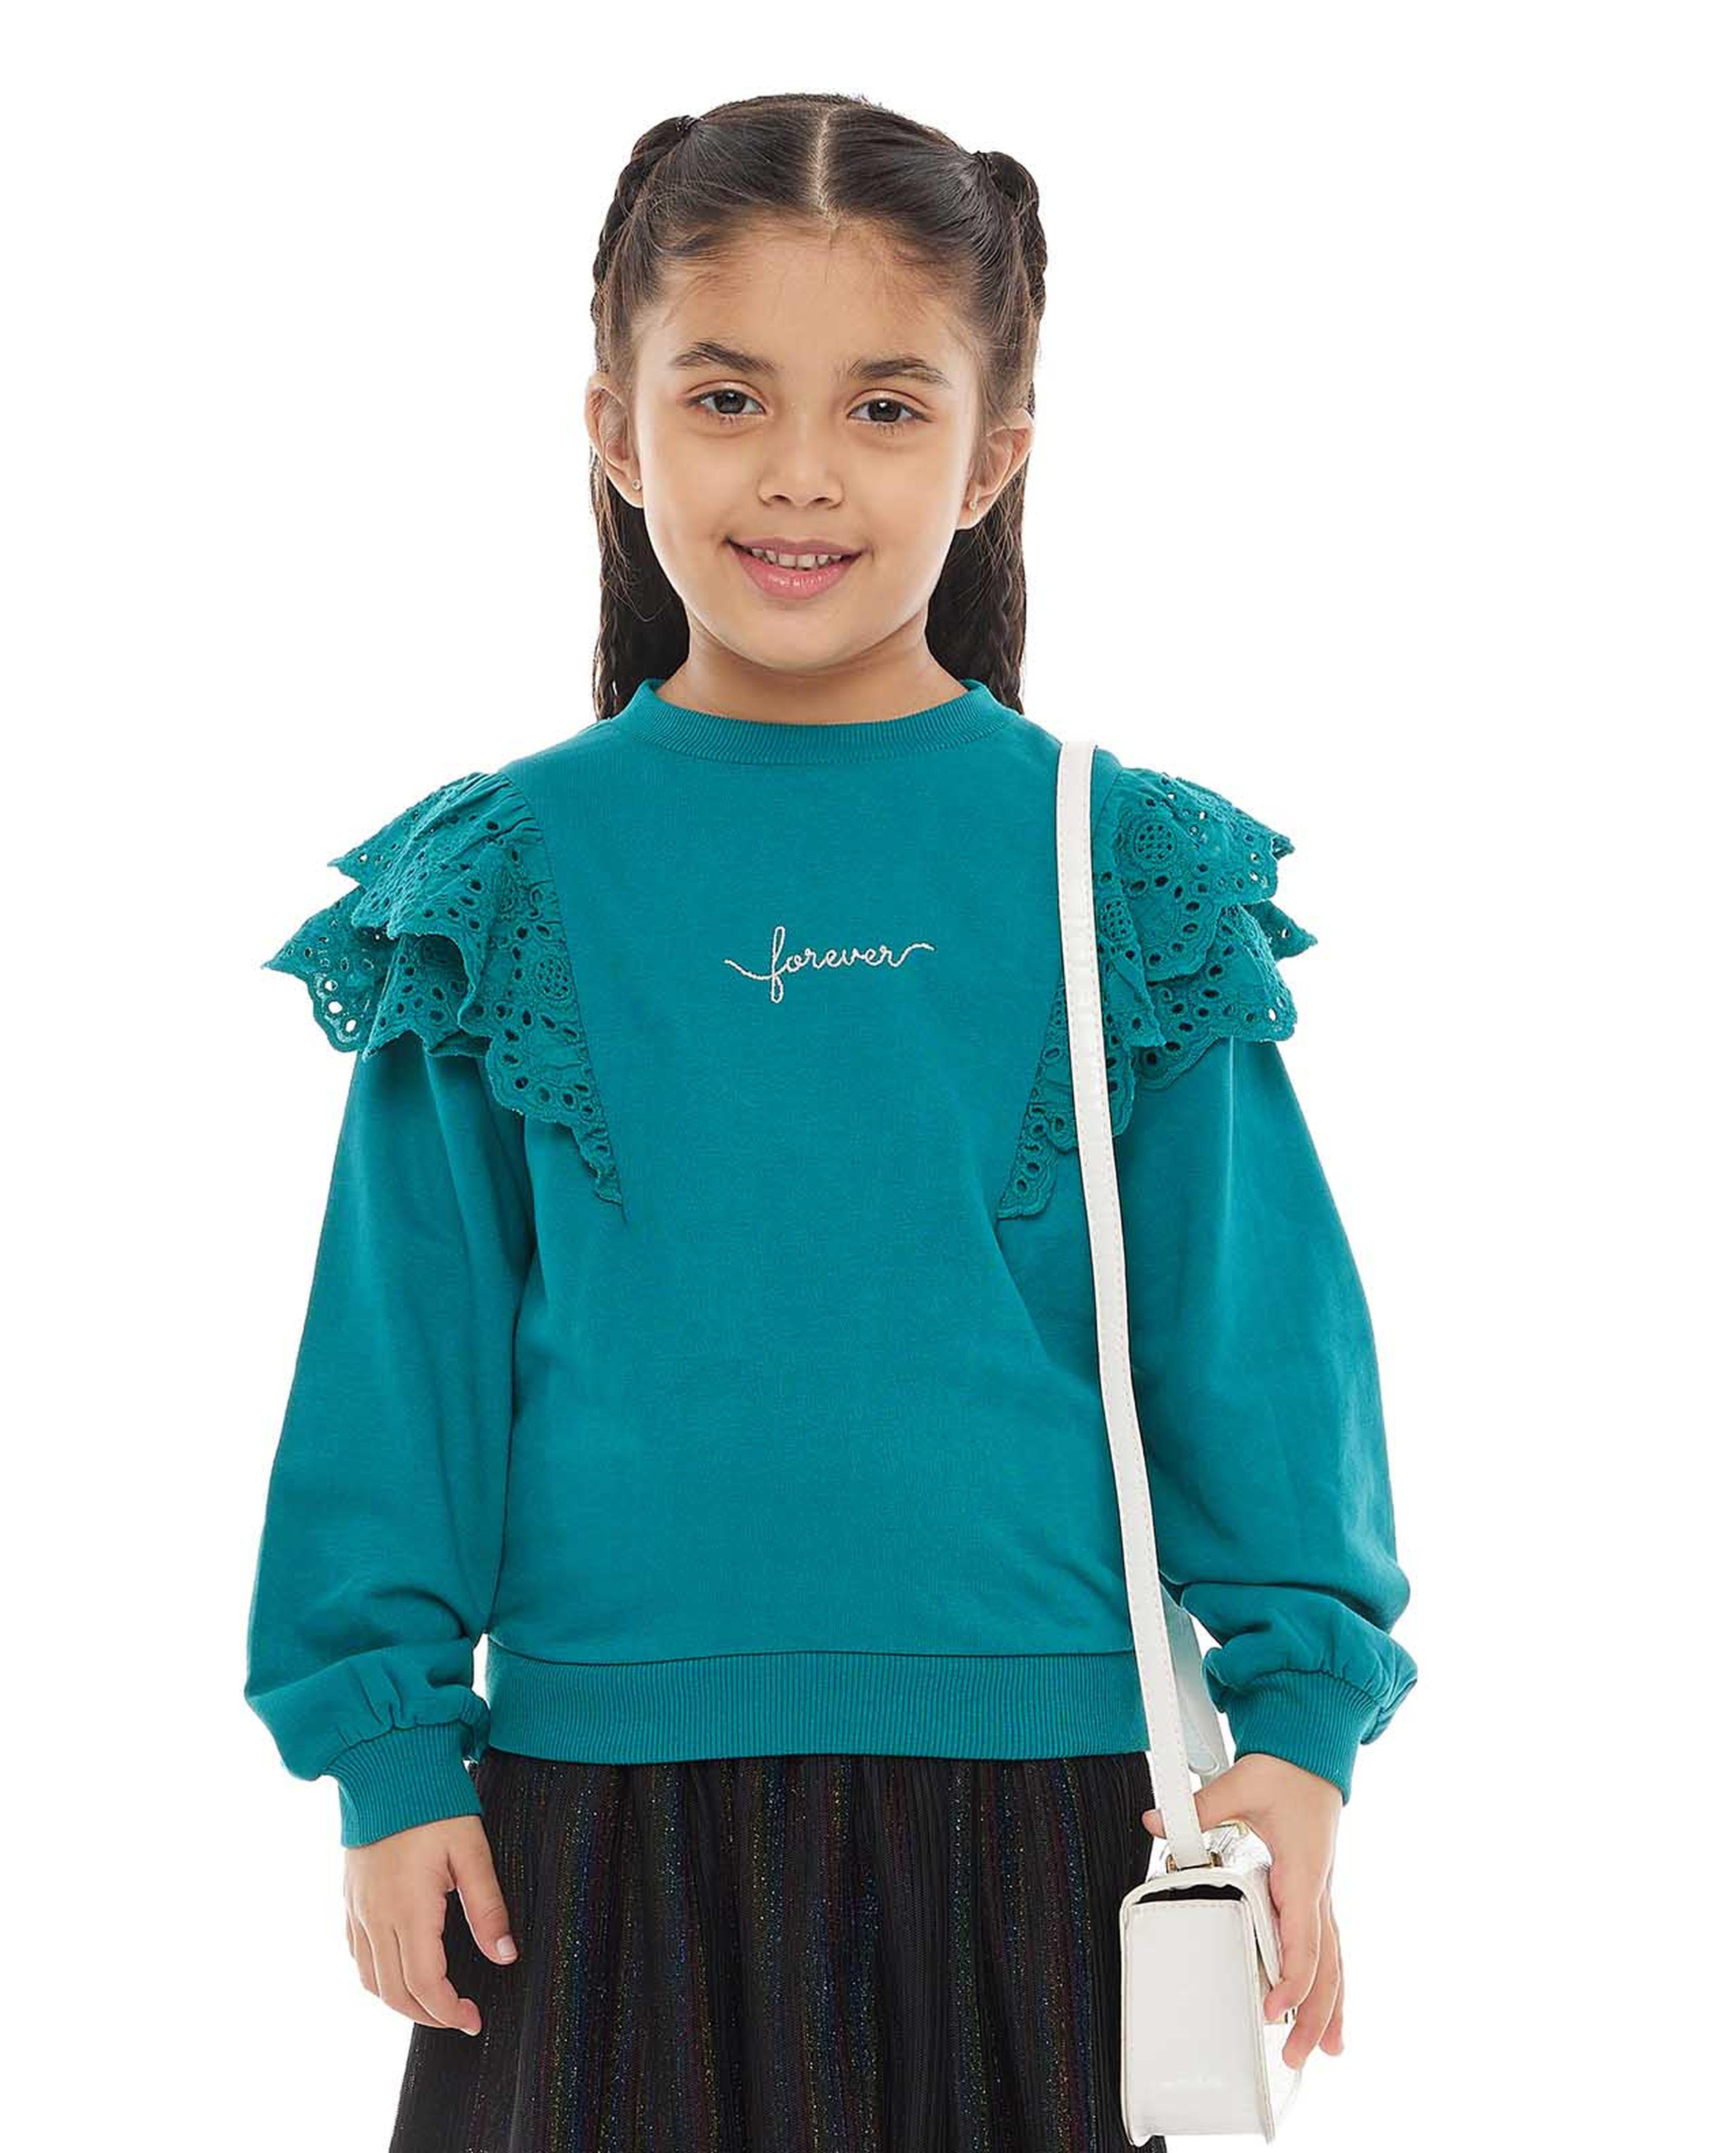 Ruffle Detail Sweatshirt with Crew Neck and Long Sleeves